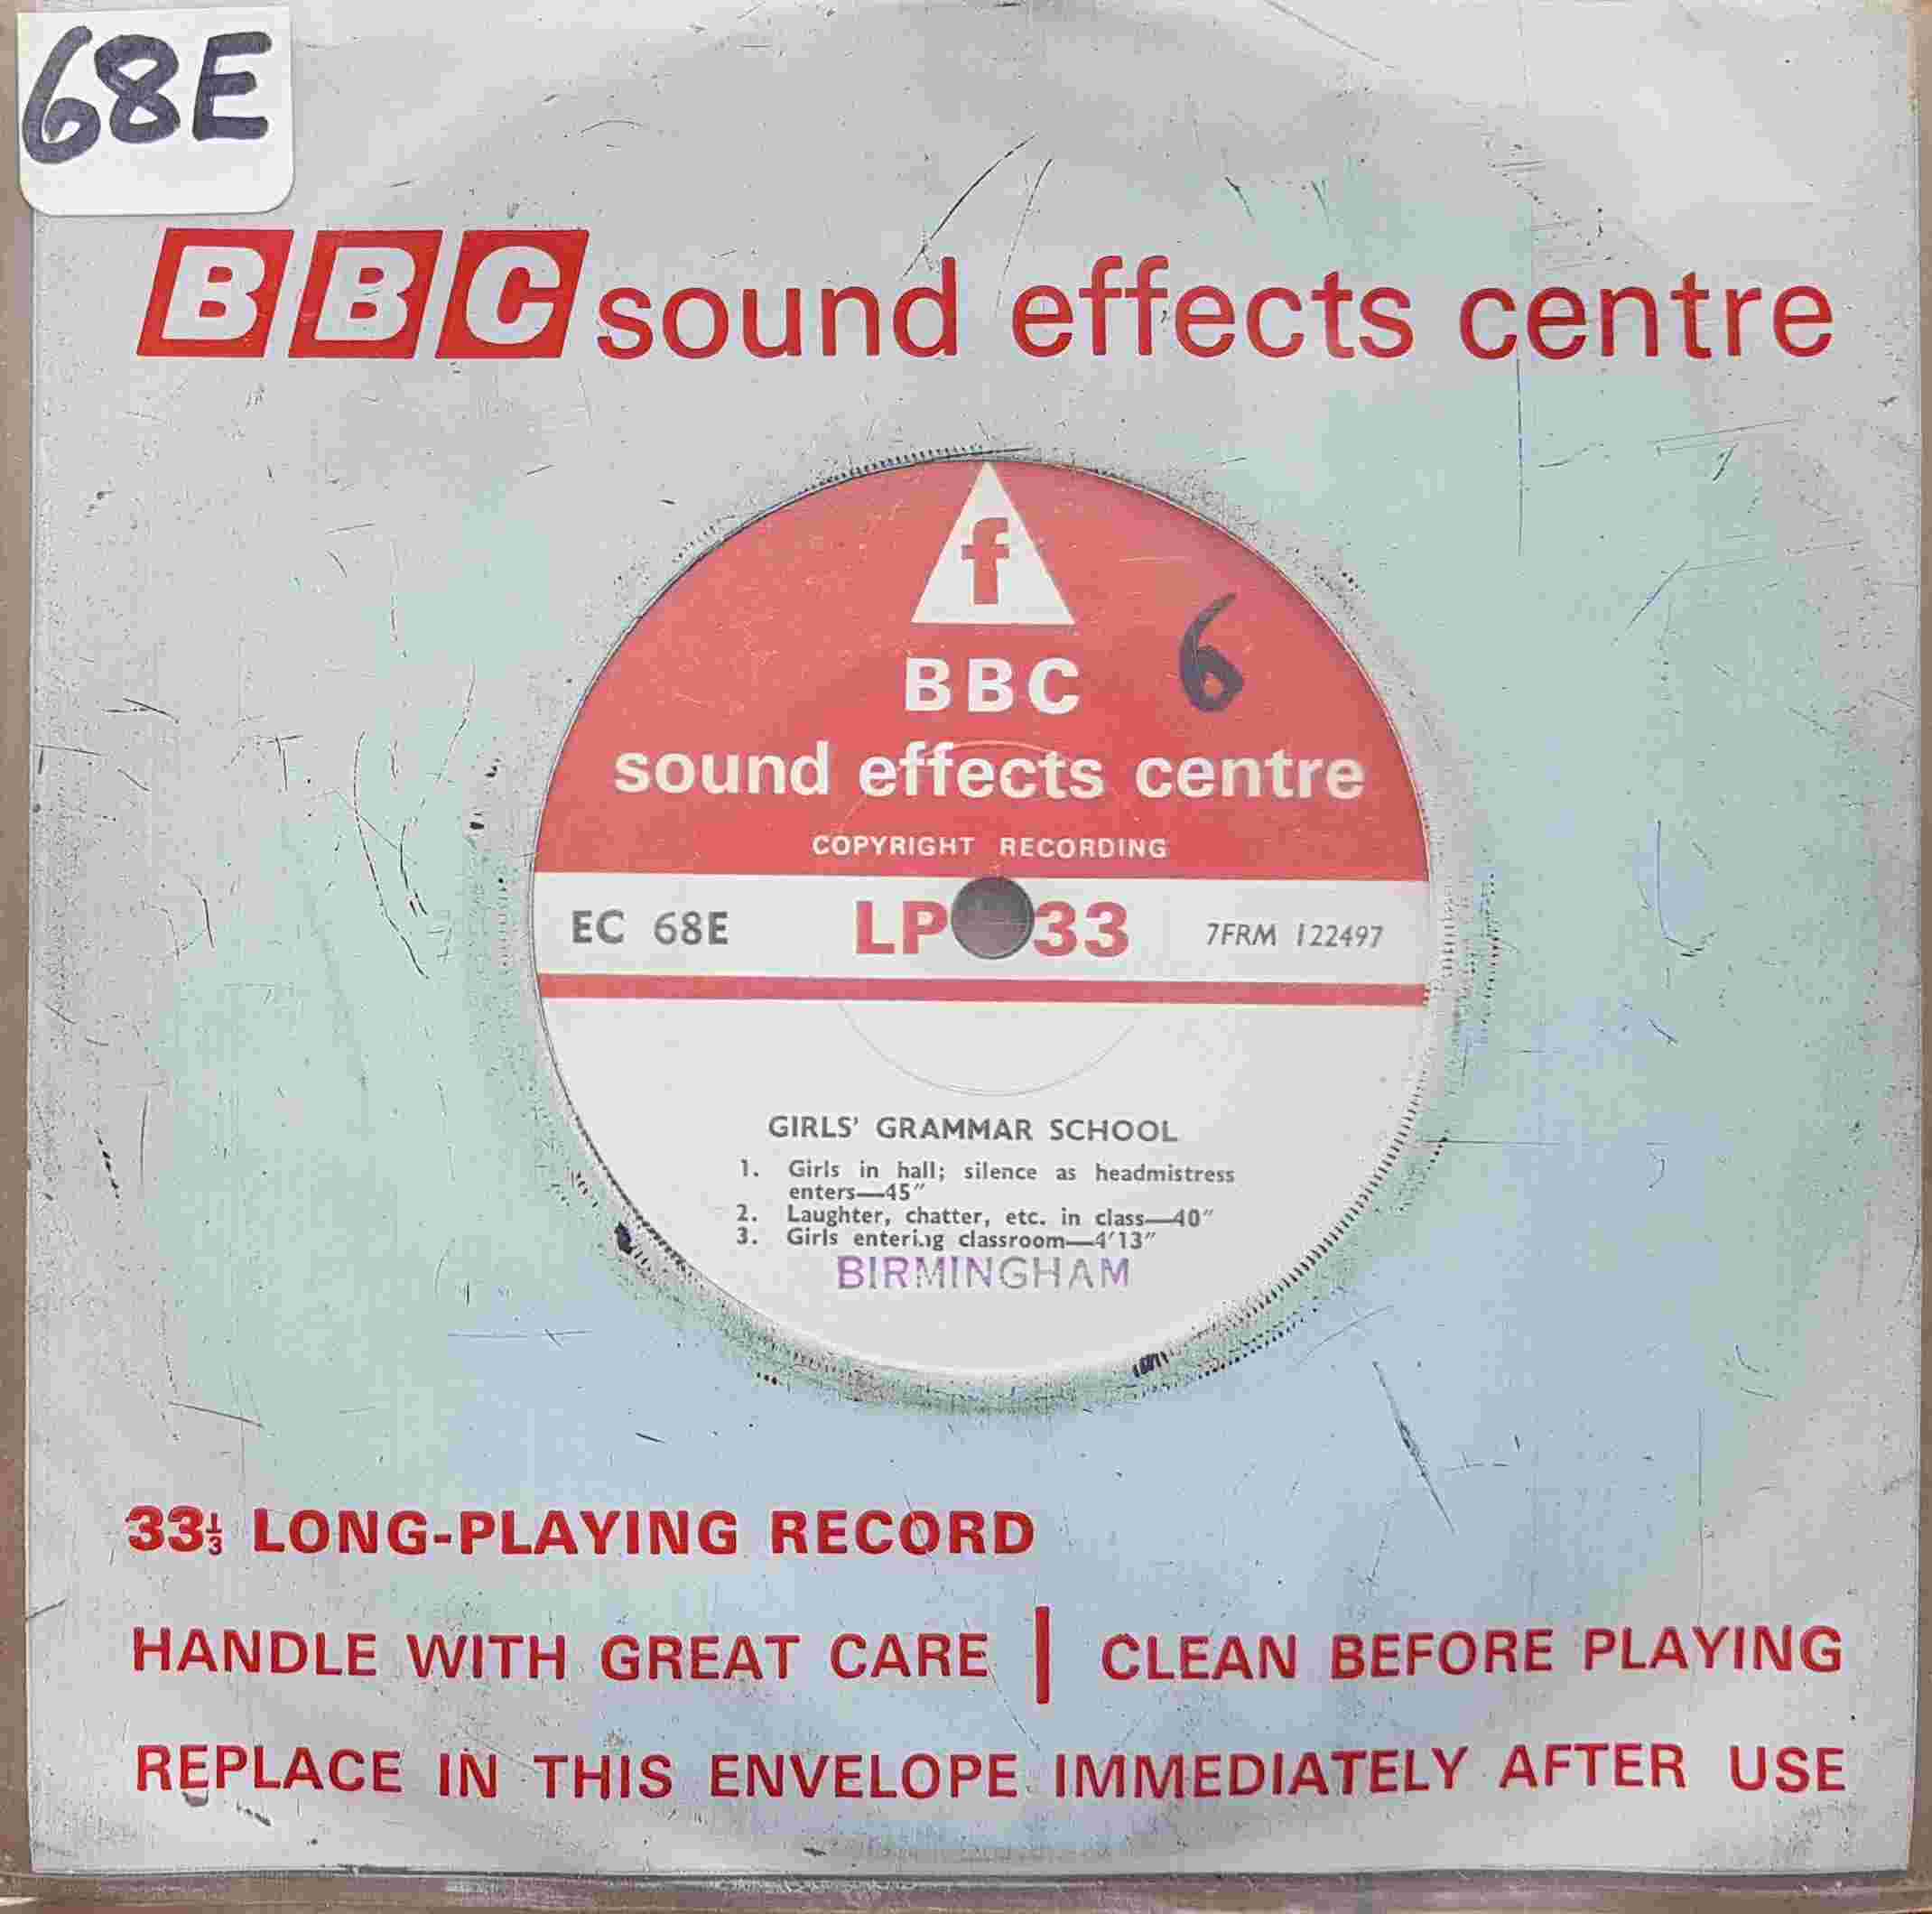 Picture of EC 68E Girls' grammar school single by artist Not registered from the BBC records and Tapes library